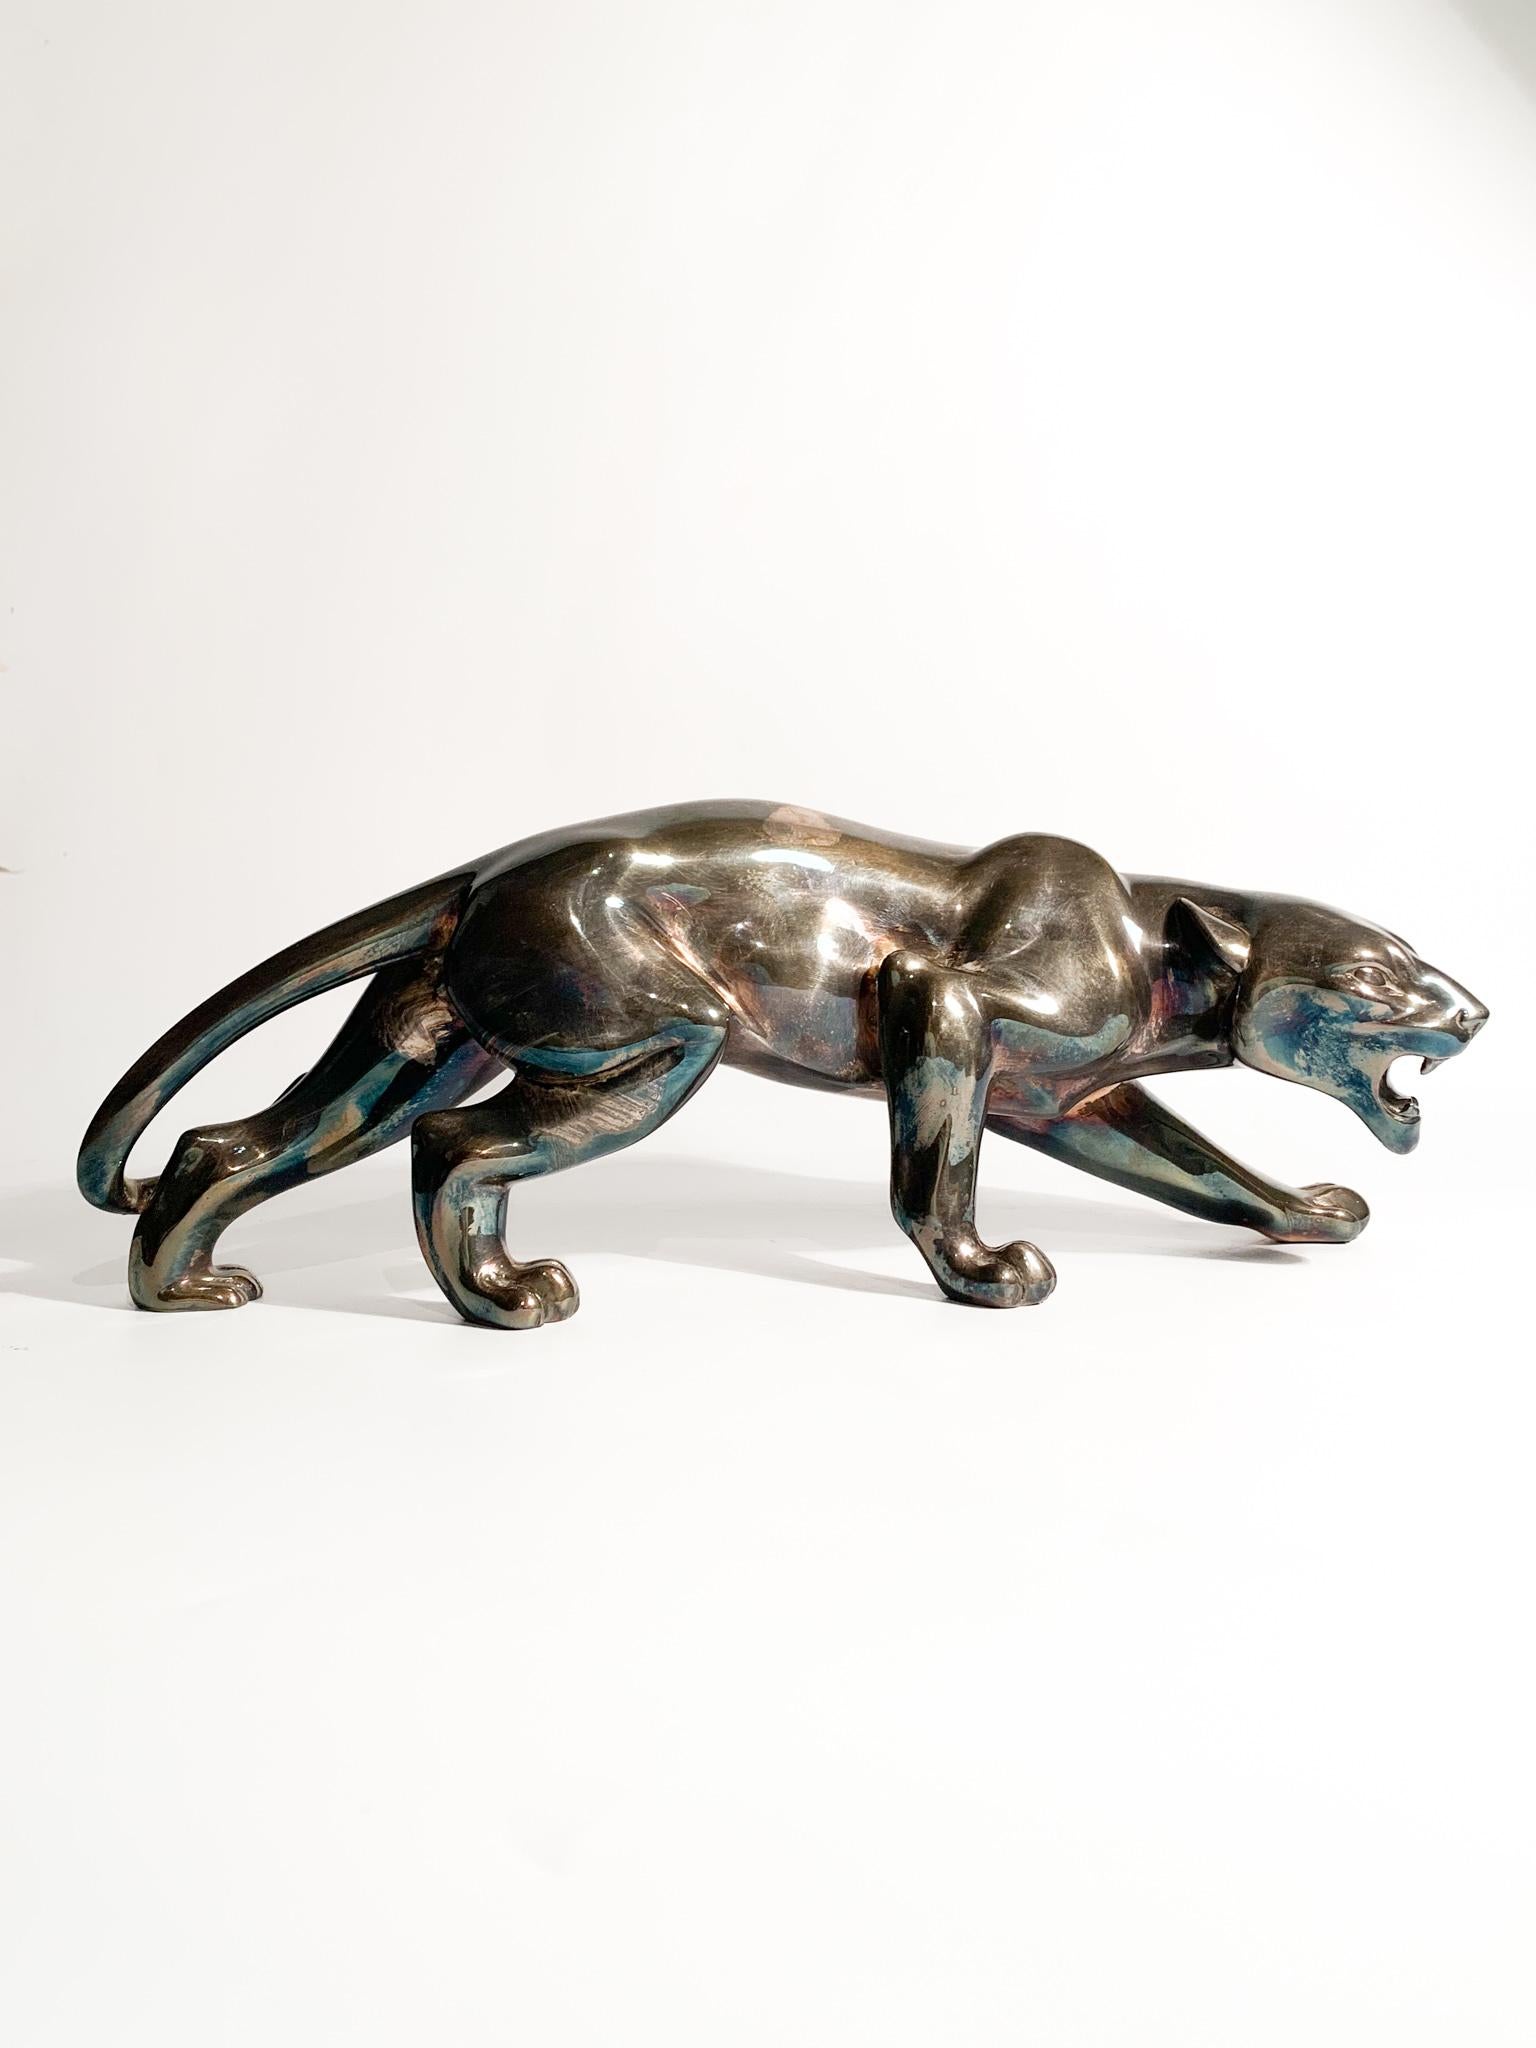 Art Deco French Deco Sculpture of Feline with Silver Casting from the 1930s For Sale